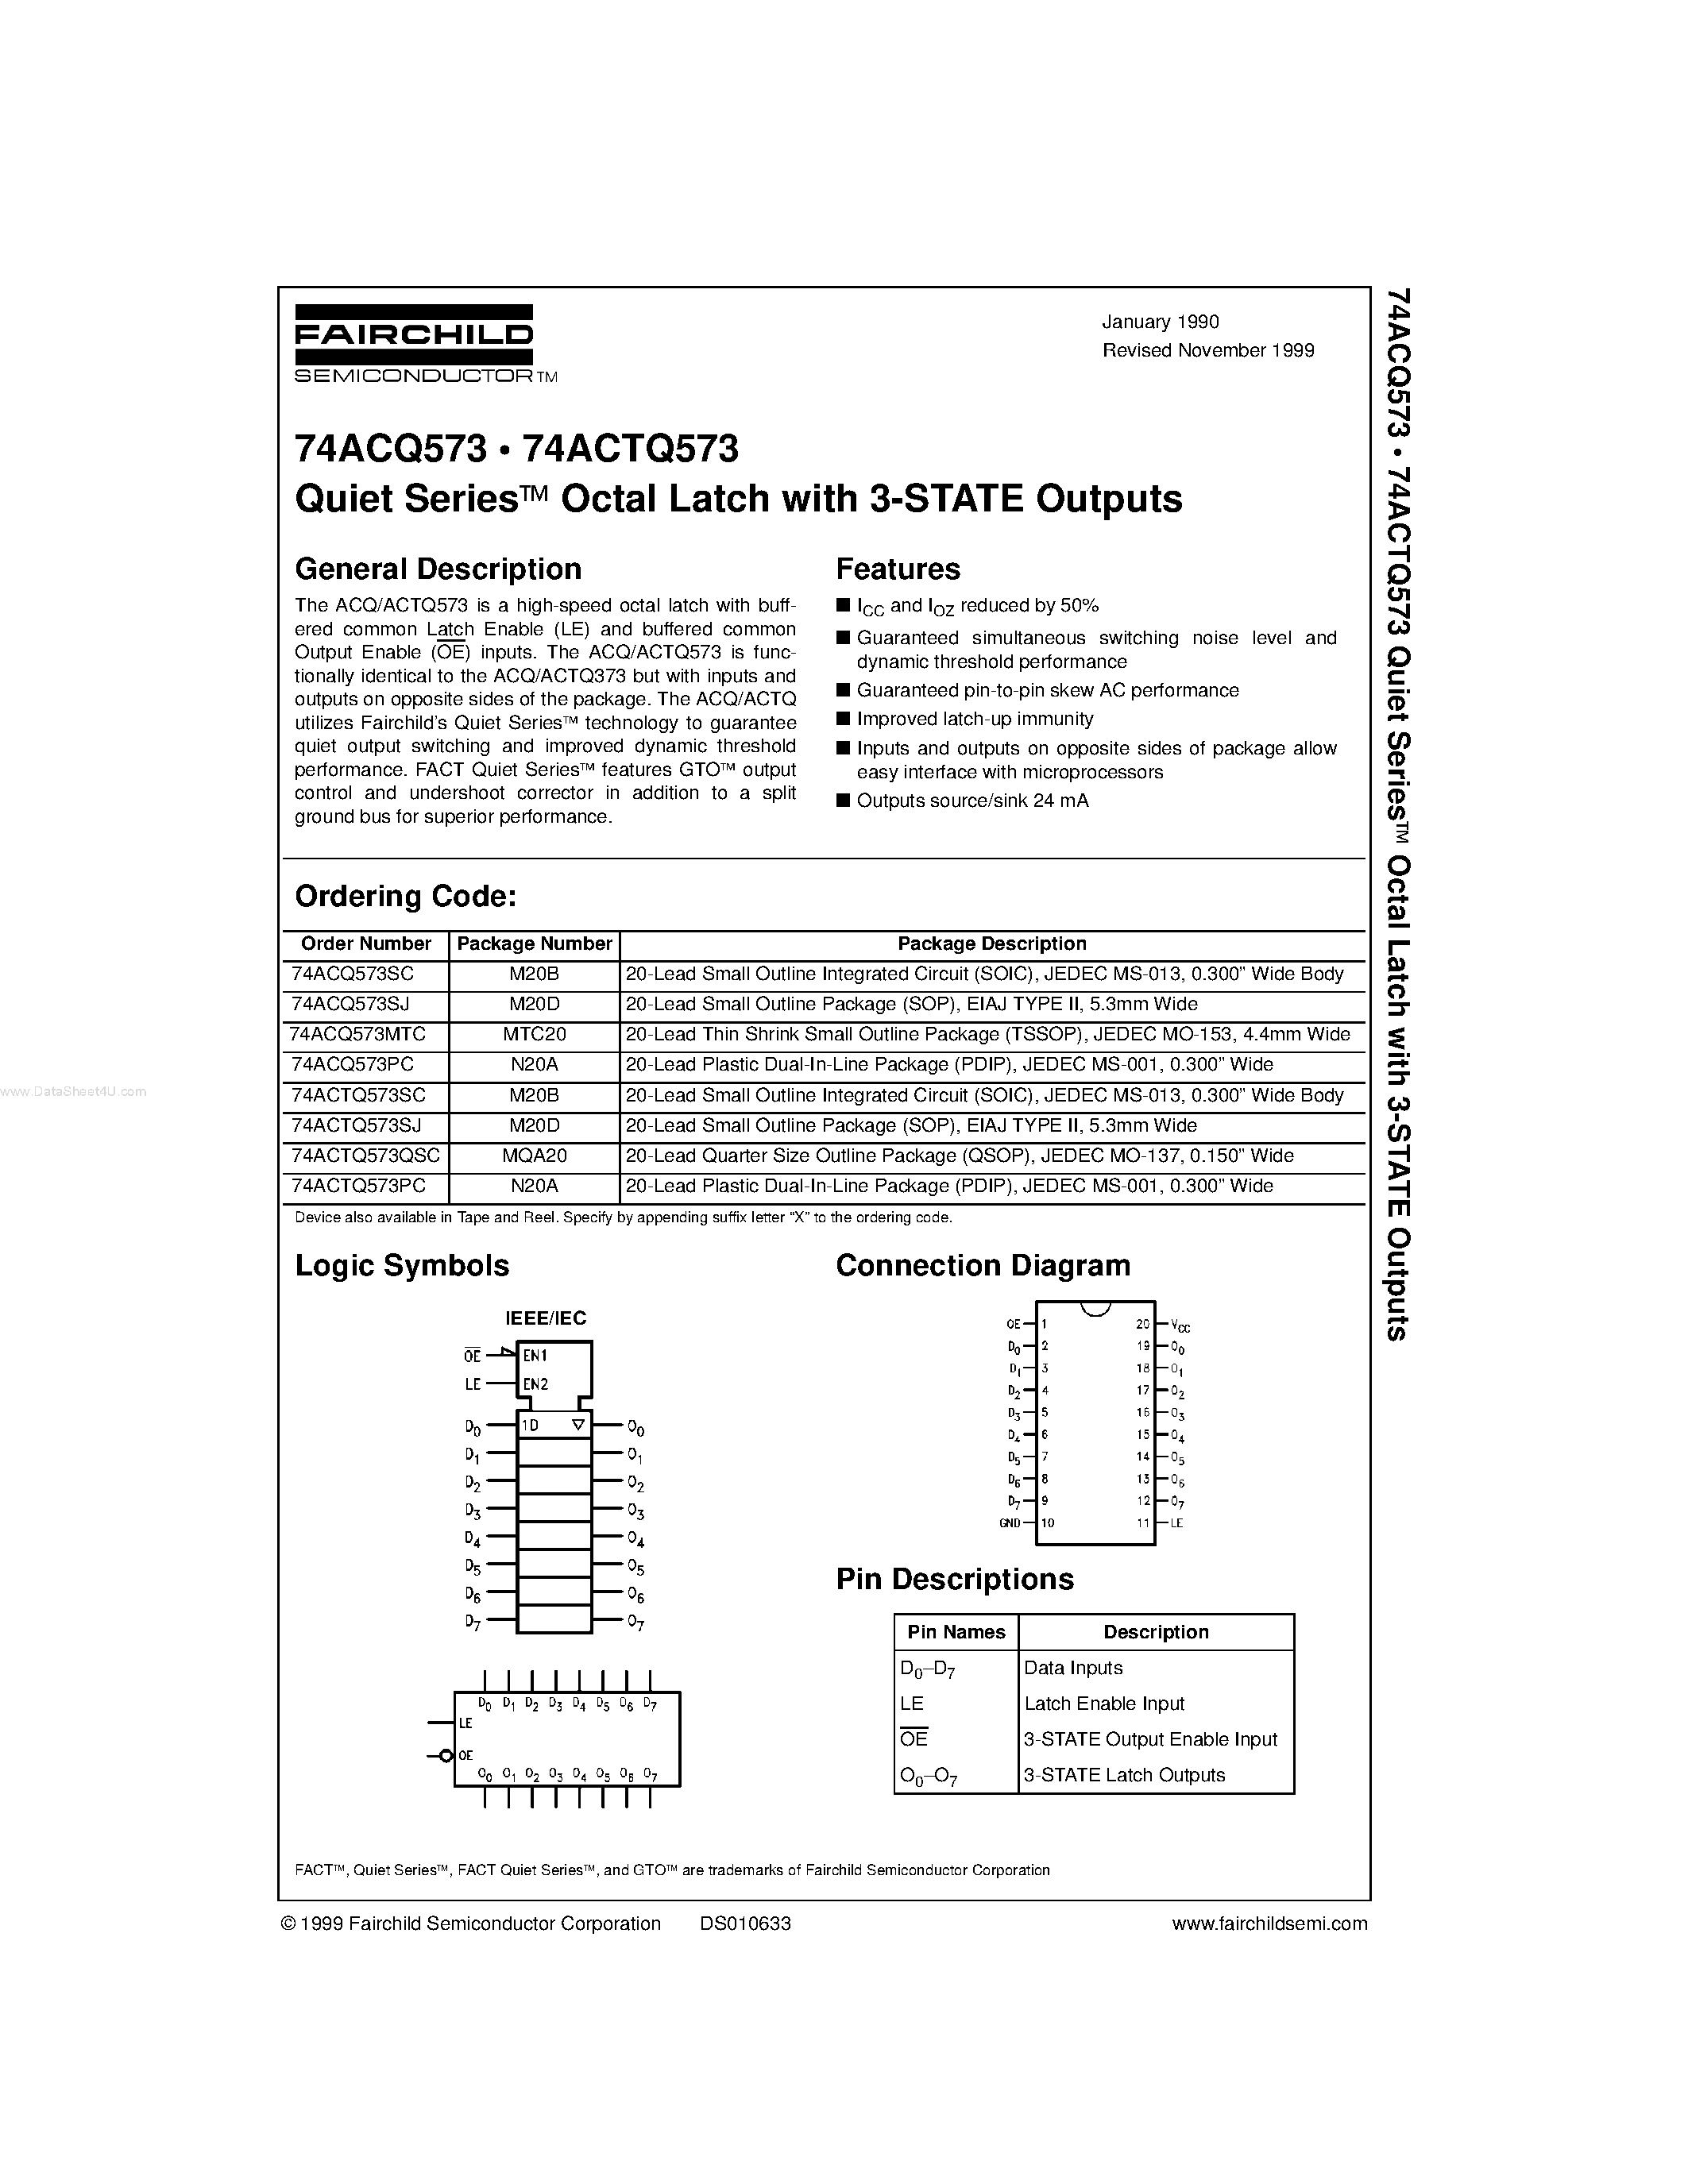 Datasheet 74ACTQ573PC - Quiet Series Octal Latch with 3-STATE Outputs page 1